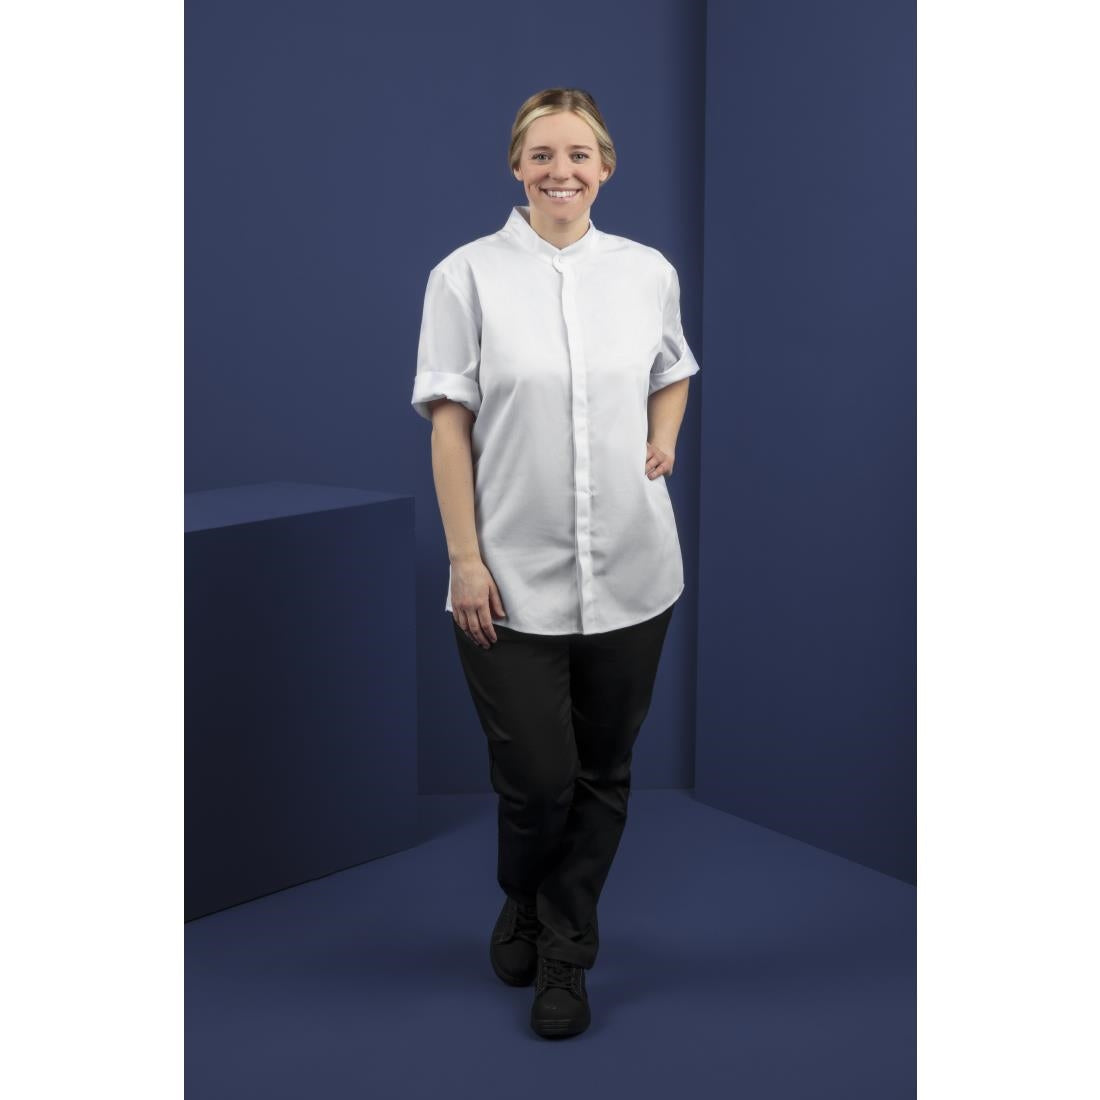 BB702-S Southside Band Collar Chefs Jacket White Size S JD Catering Equipment Solutions Ltd